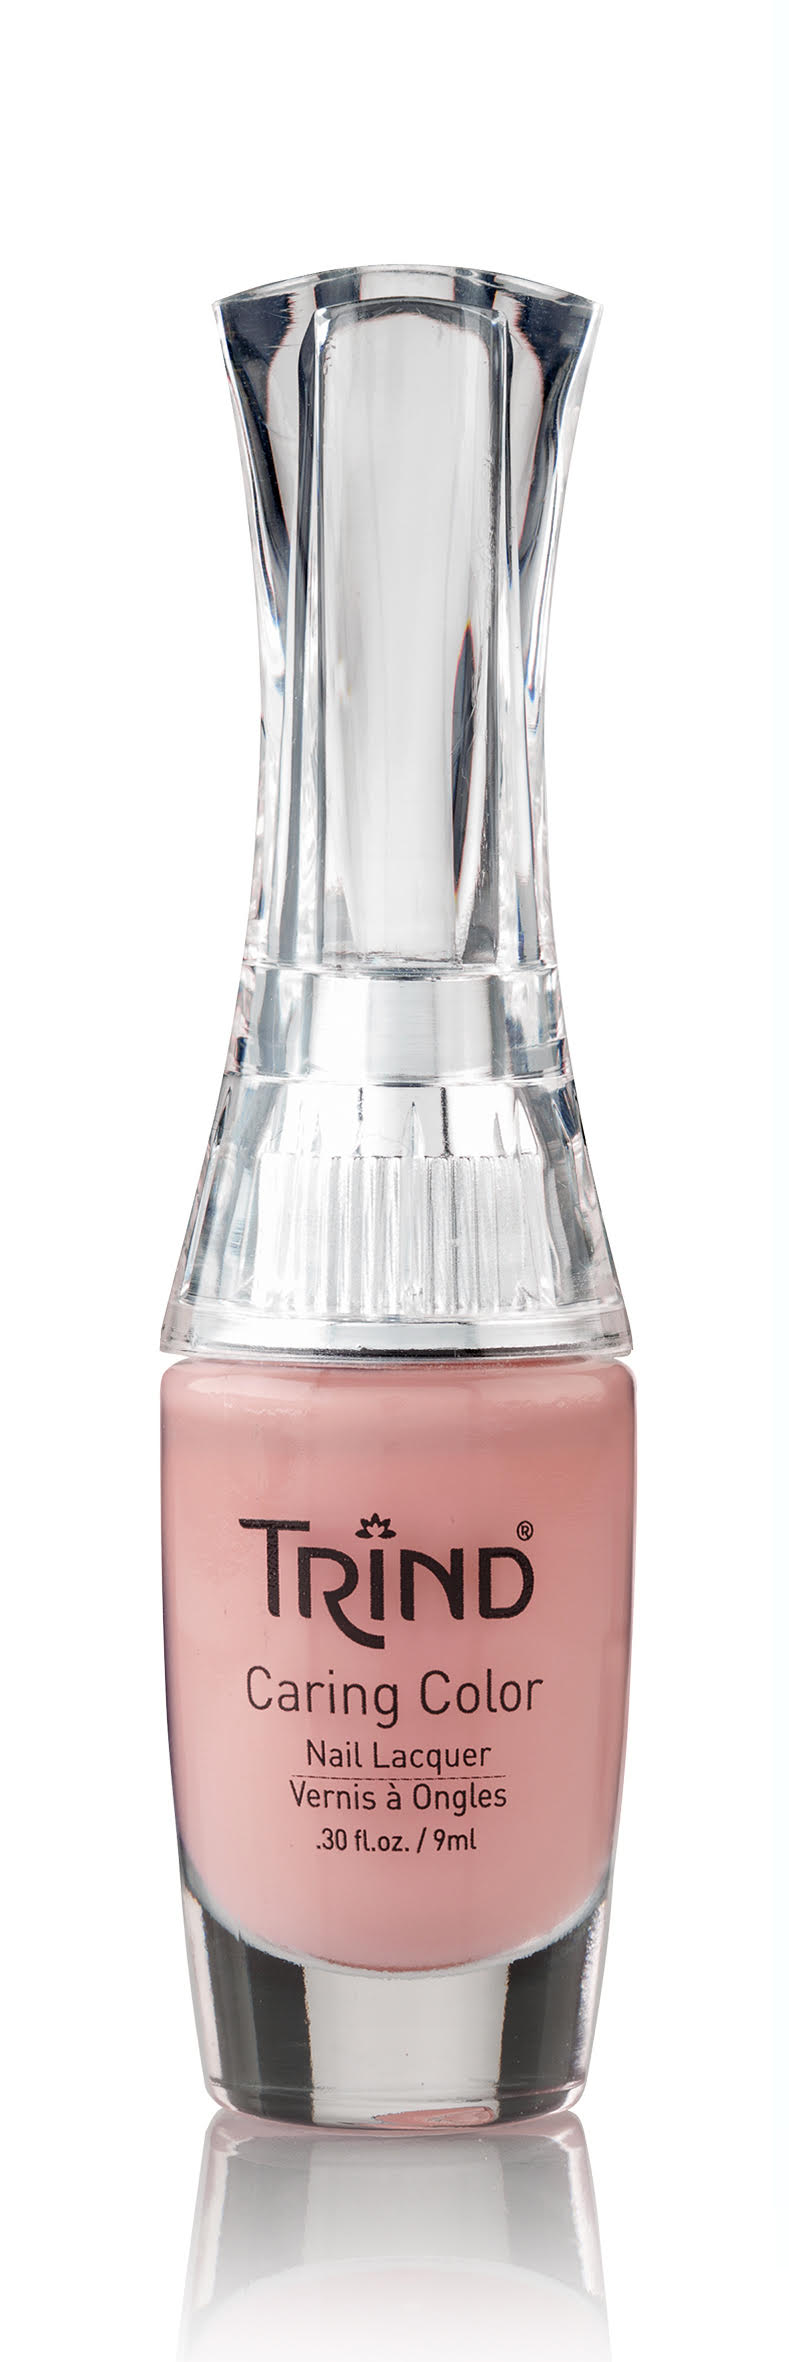 Trind Caring Color Nail Lacquer CC210